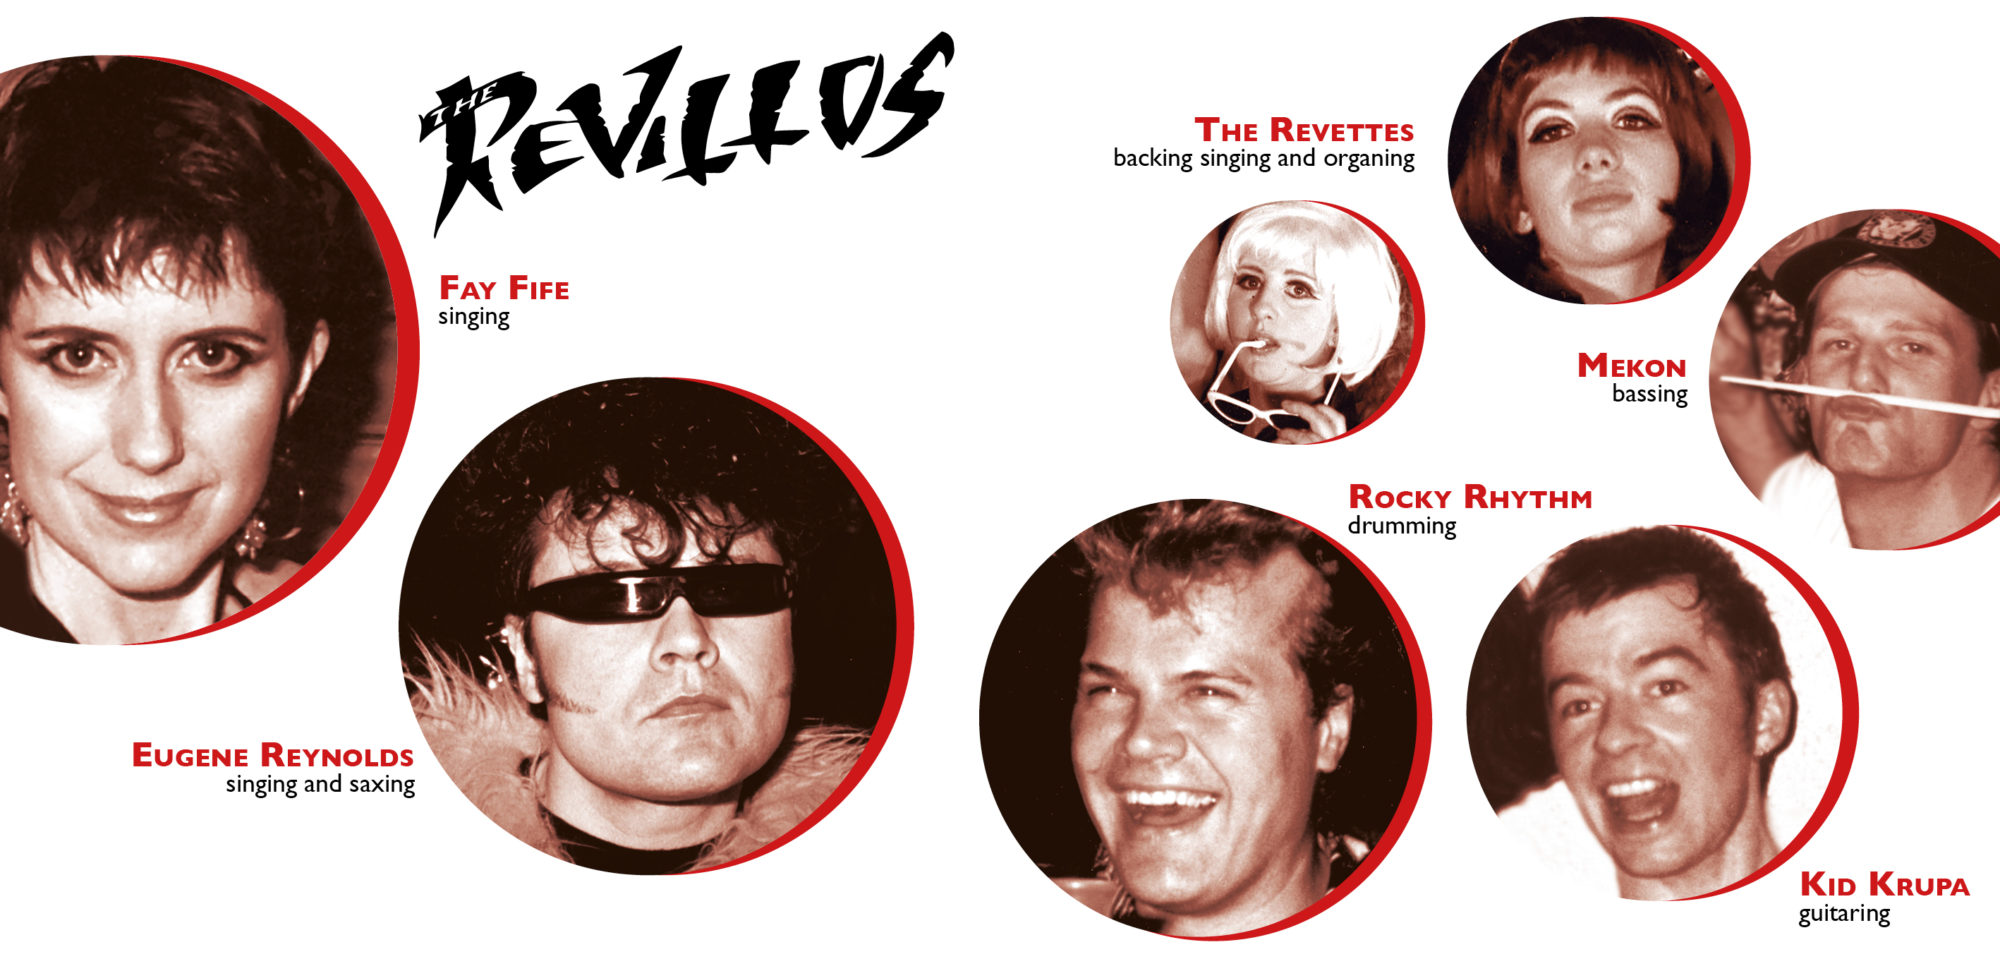 The Revillos' Live From The Orient CD Digisleeve booklet pp4-5